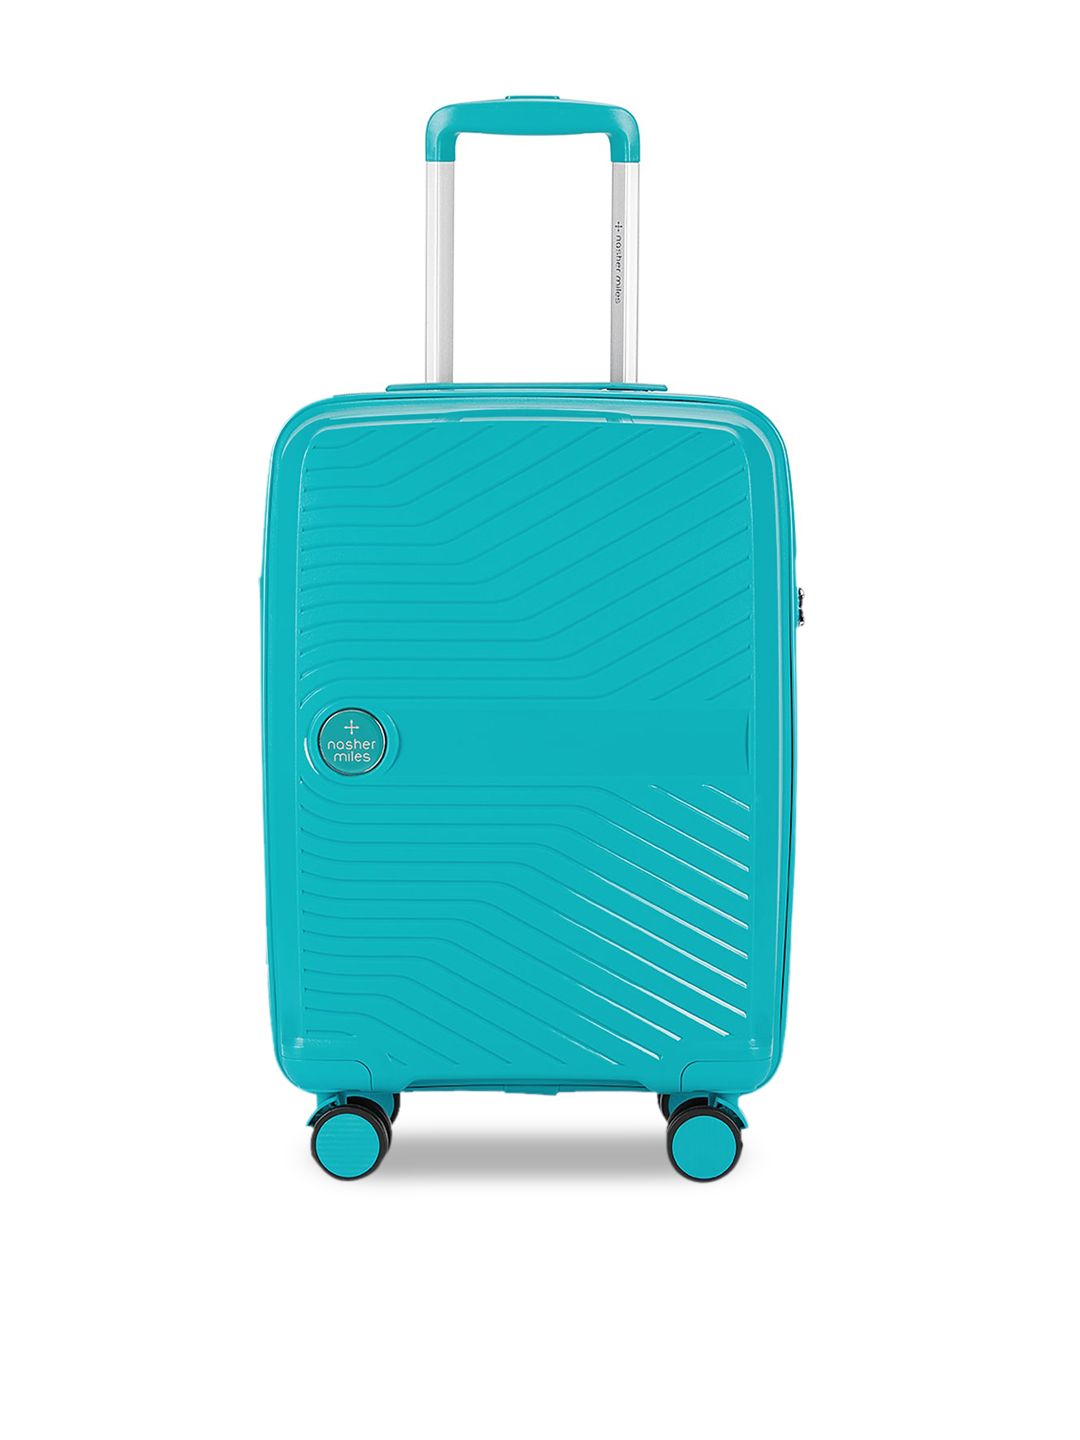 Nasher Miles Teal Blue Textured Hard-Sided Cabin Trolley Suitcase Price in India